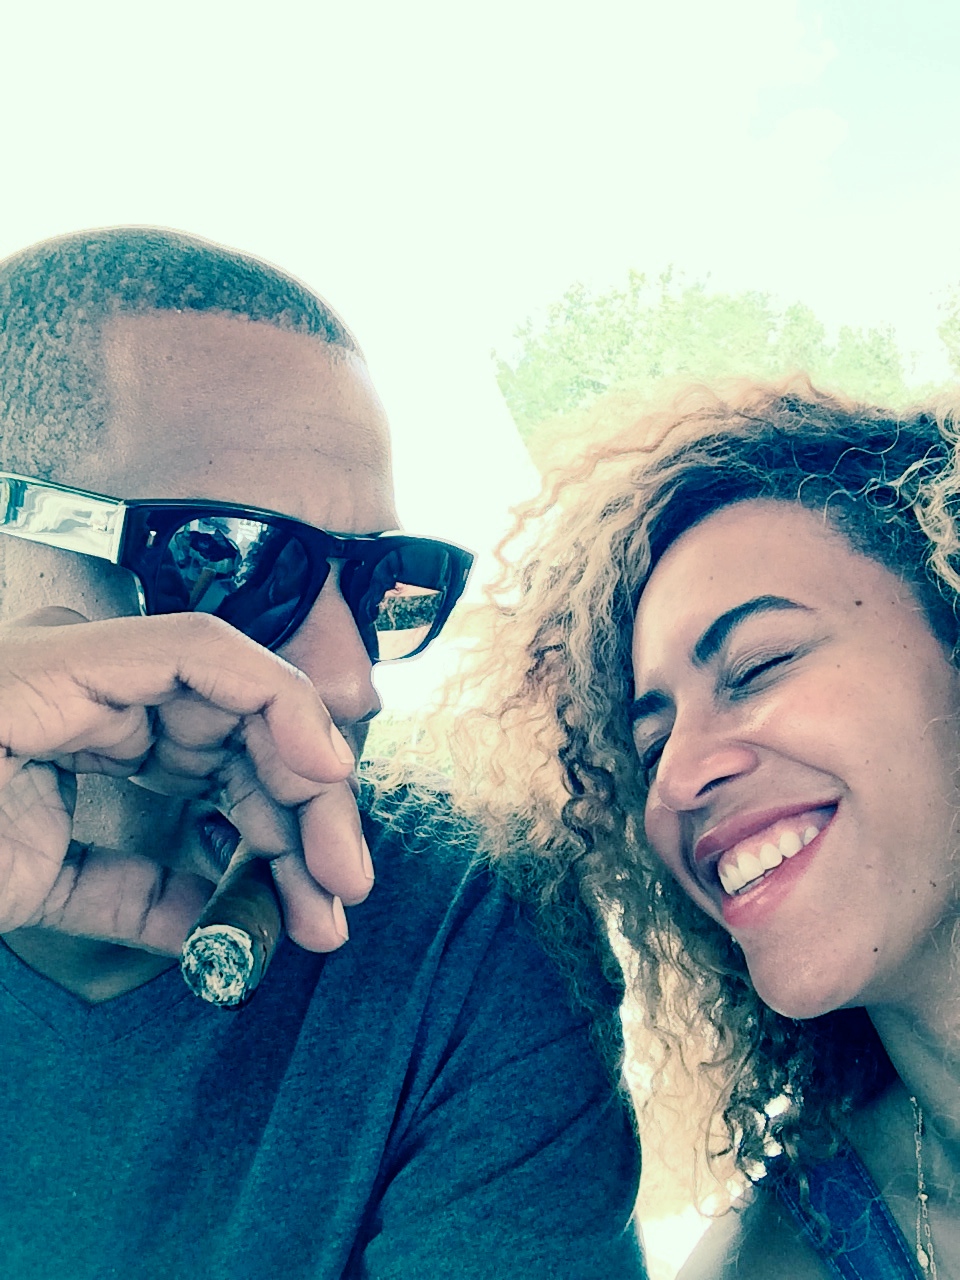 cigars-and-laughter-beyonce-jay-z-6th-anniversary-vacation-dominican-republic-the-jasmine-brand